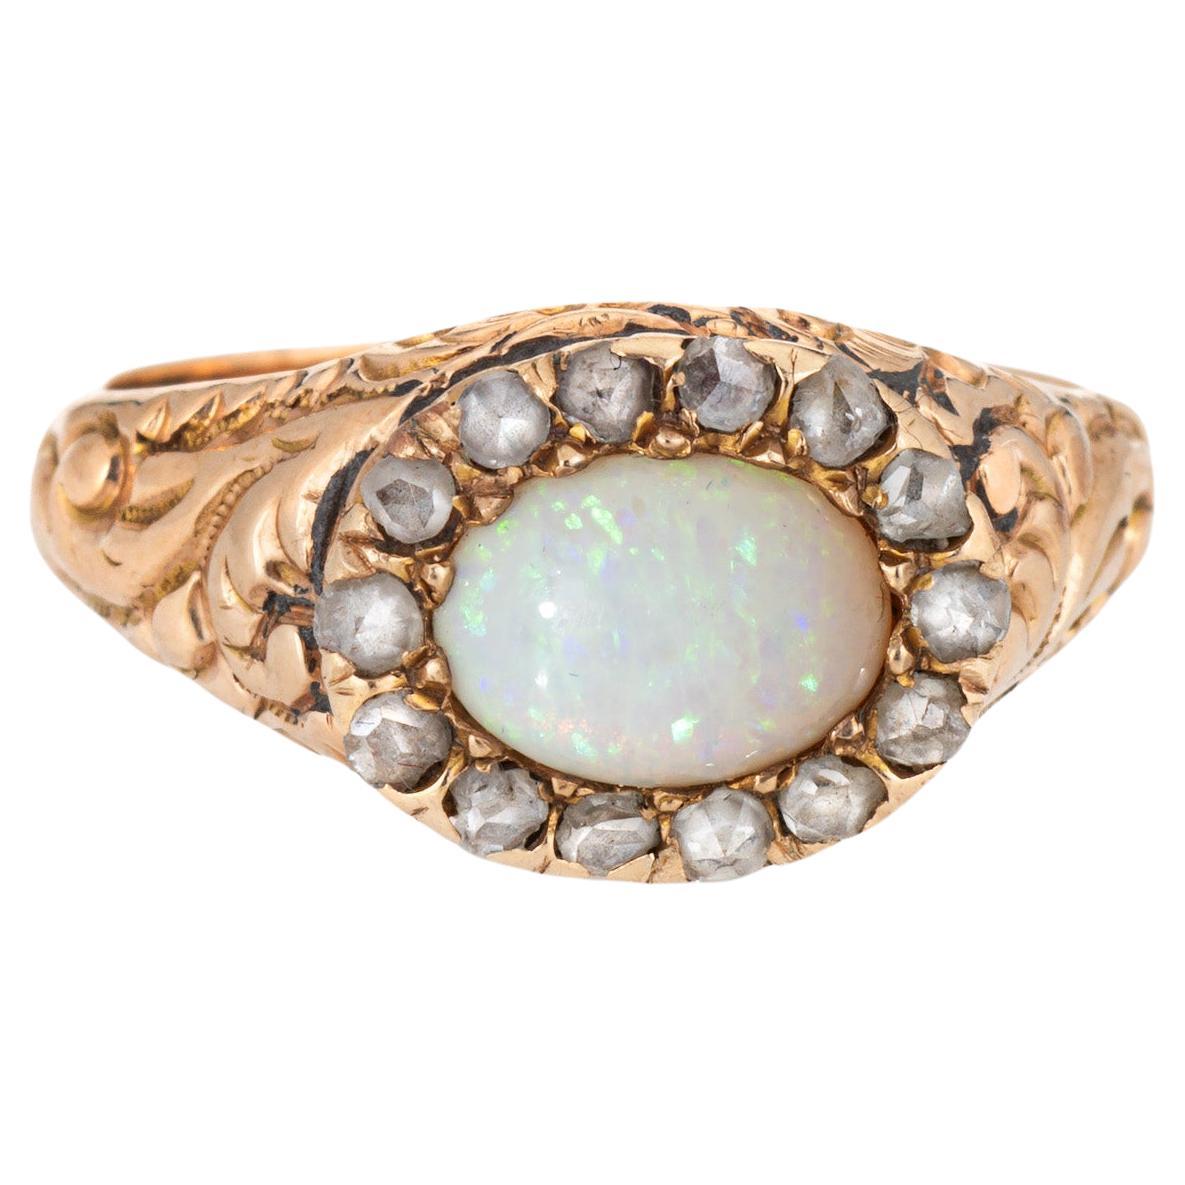 Antique Victorian Opal Diamond Ring 14k Yellow Gold Sz 5.75 Fine Vintage Jewelry For Sale